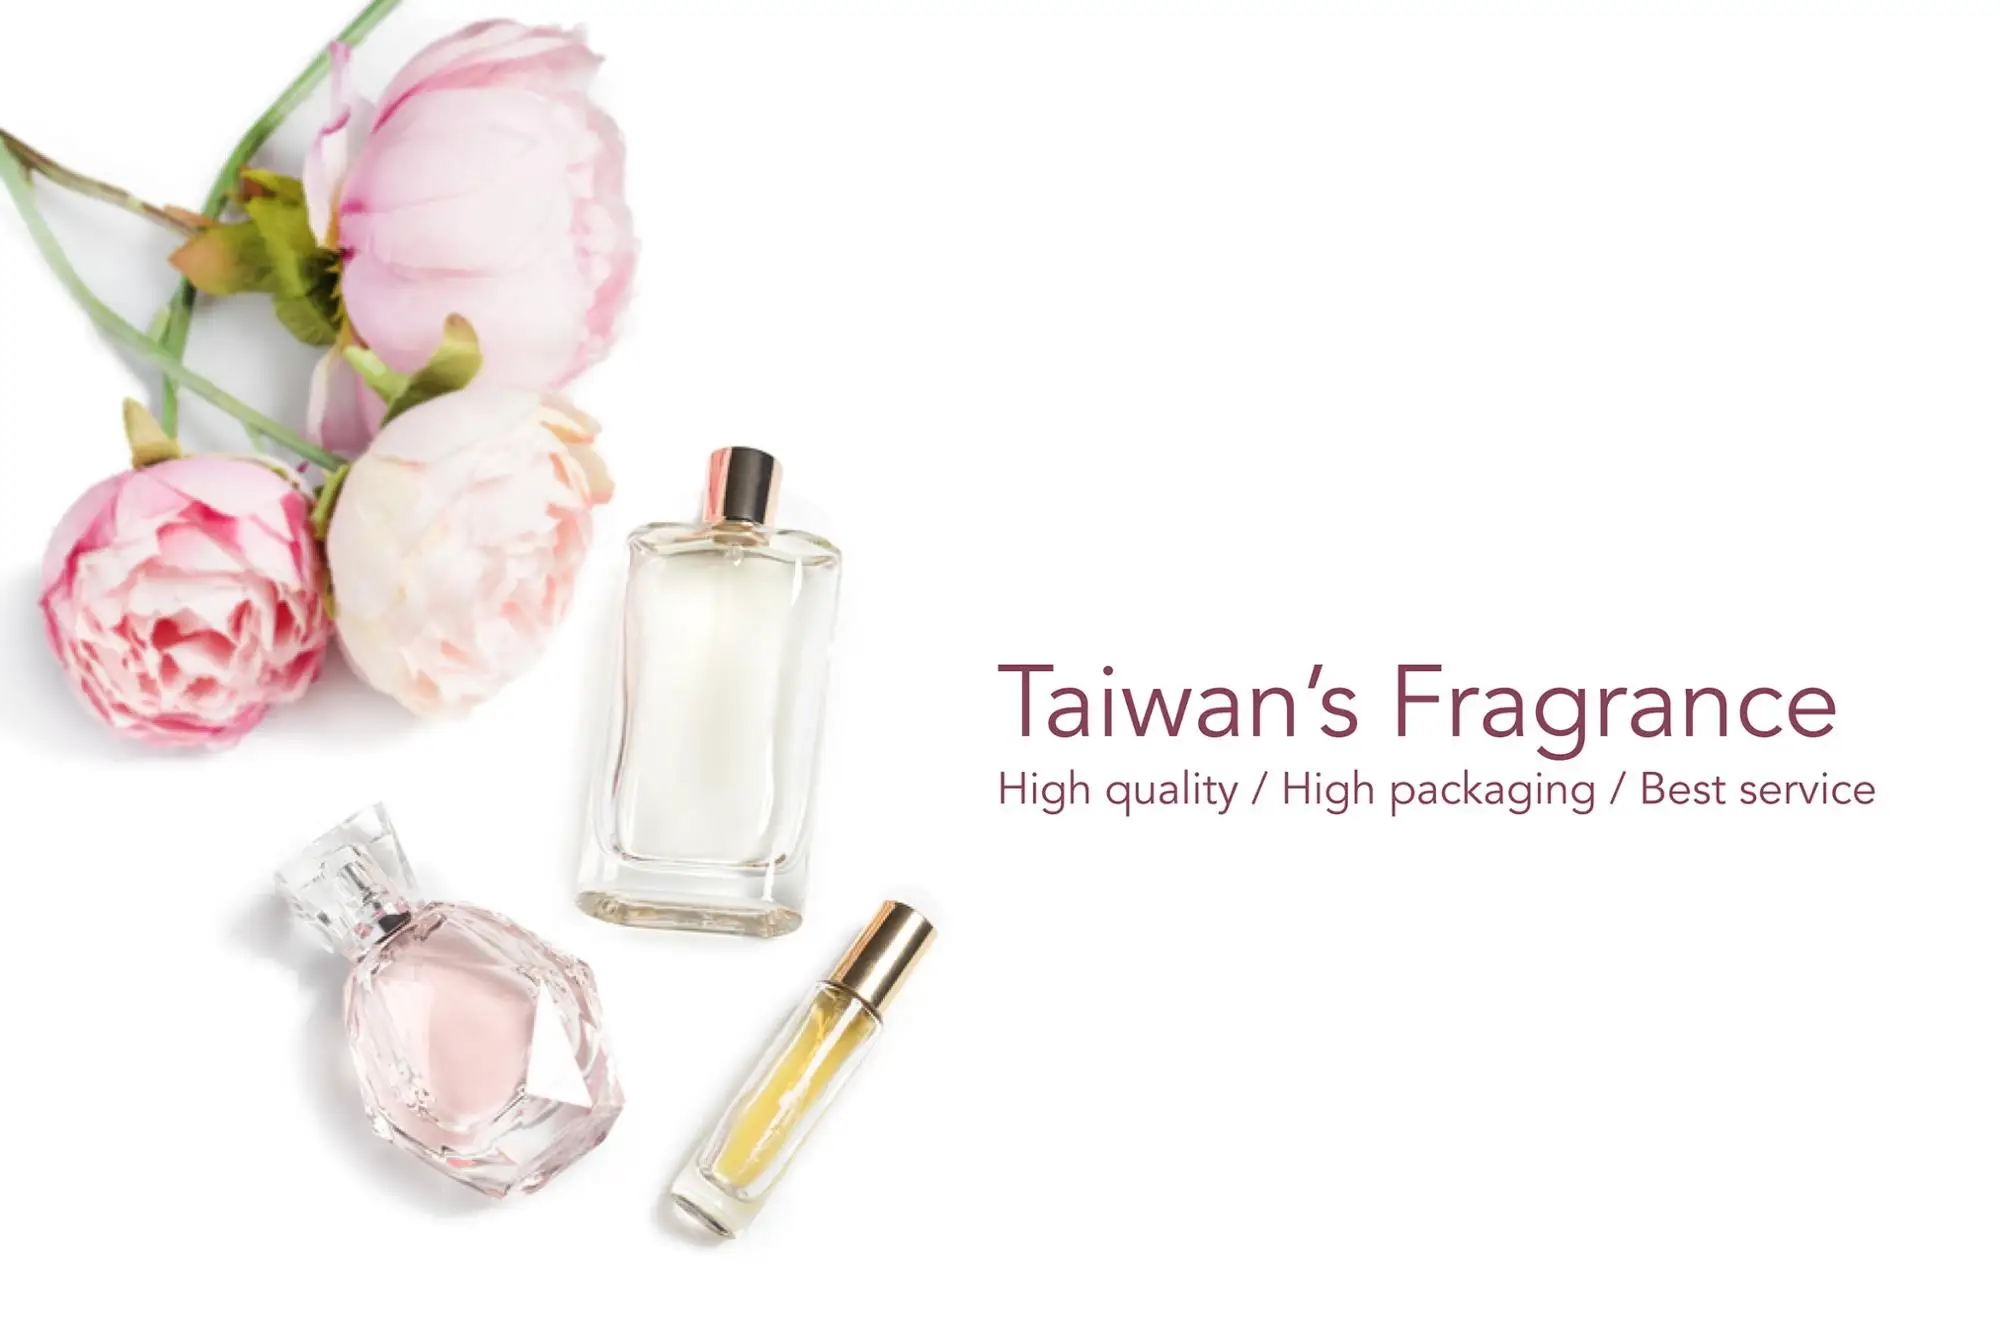 Hottest sales best scent aroma concentrated oil perfume based from France branded perfume fragrance oil